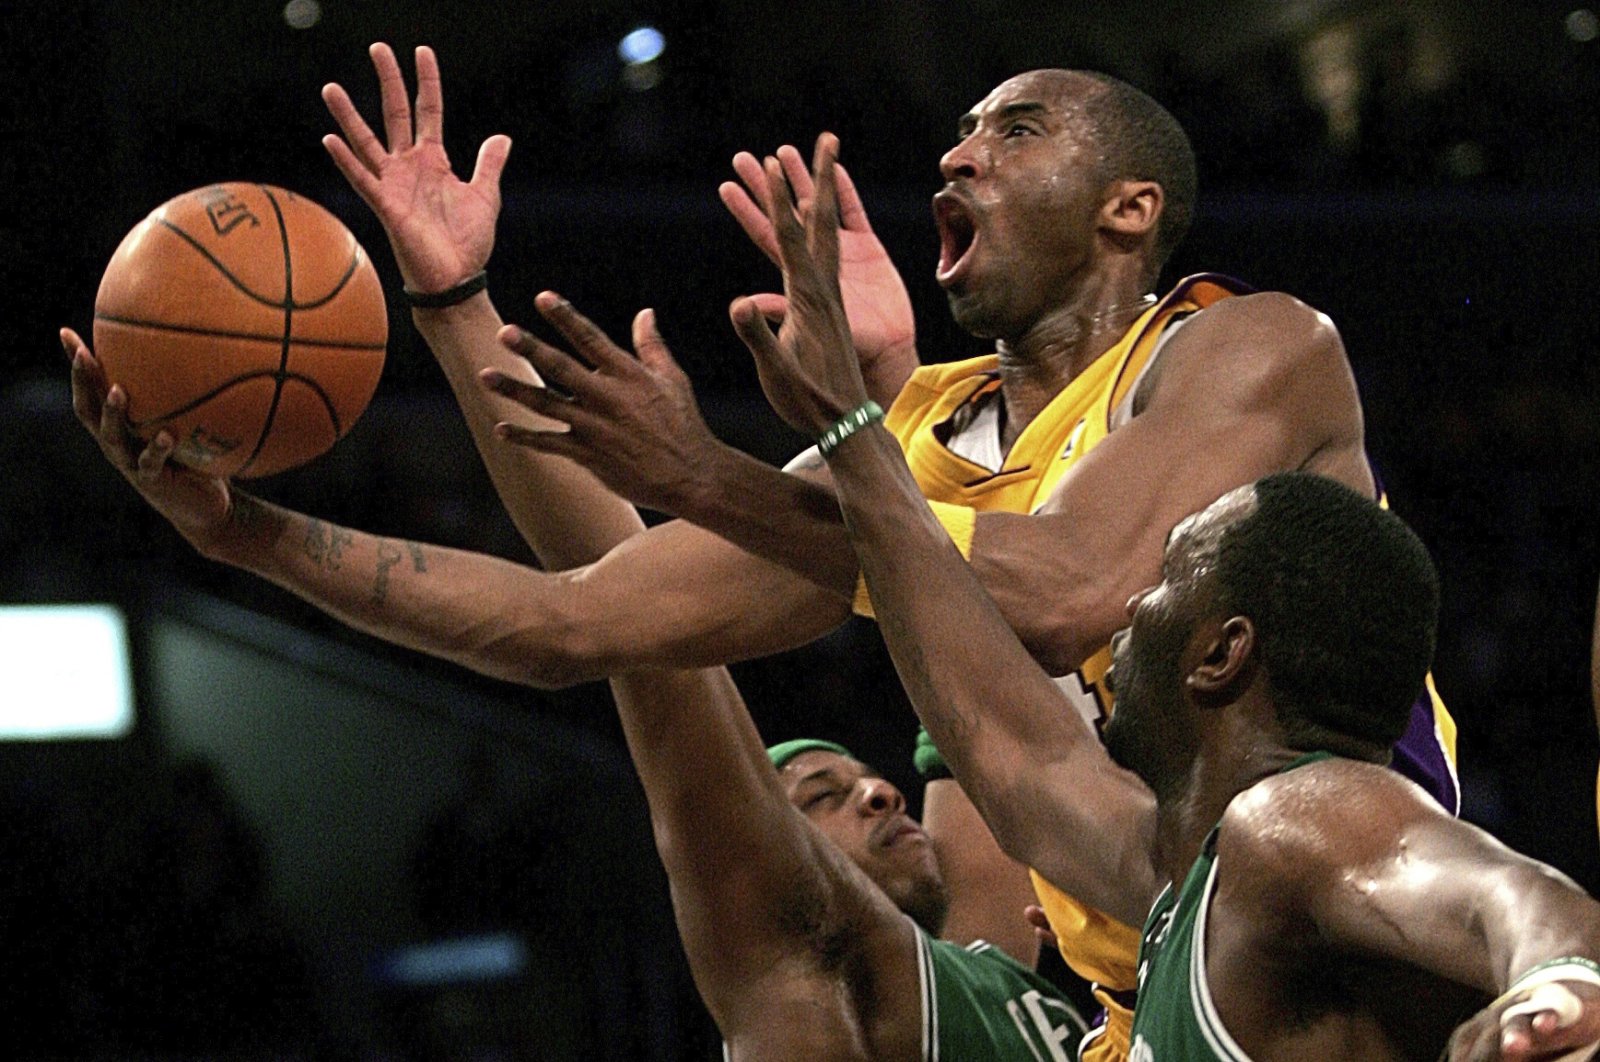 In this Feb. 23, 2007, file photo, Los Angeles Lakers' Kobe Bryant goes up for a shot between Boston Celtics' Paul Pierce and Al Jefferson during the first half of an NBA basketball game in Los Angeles.